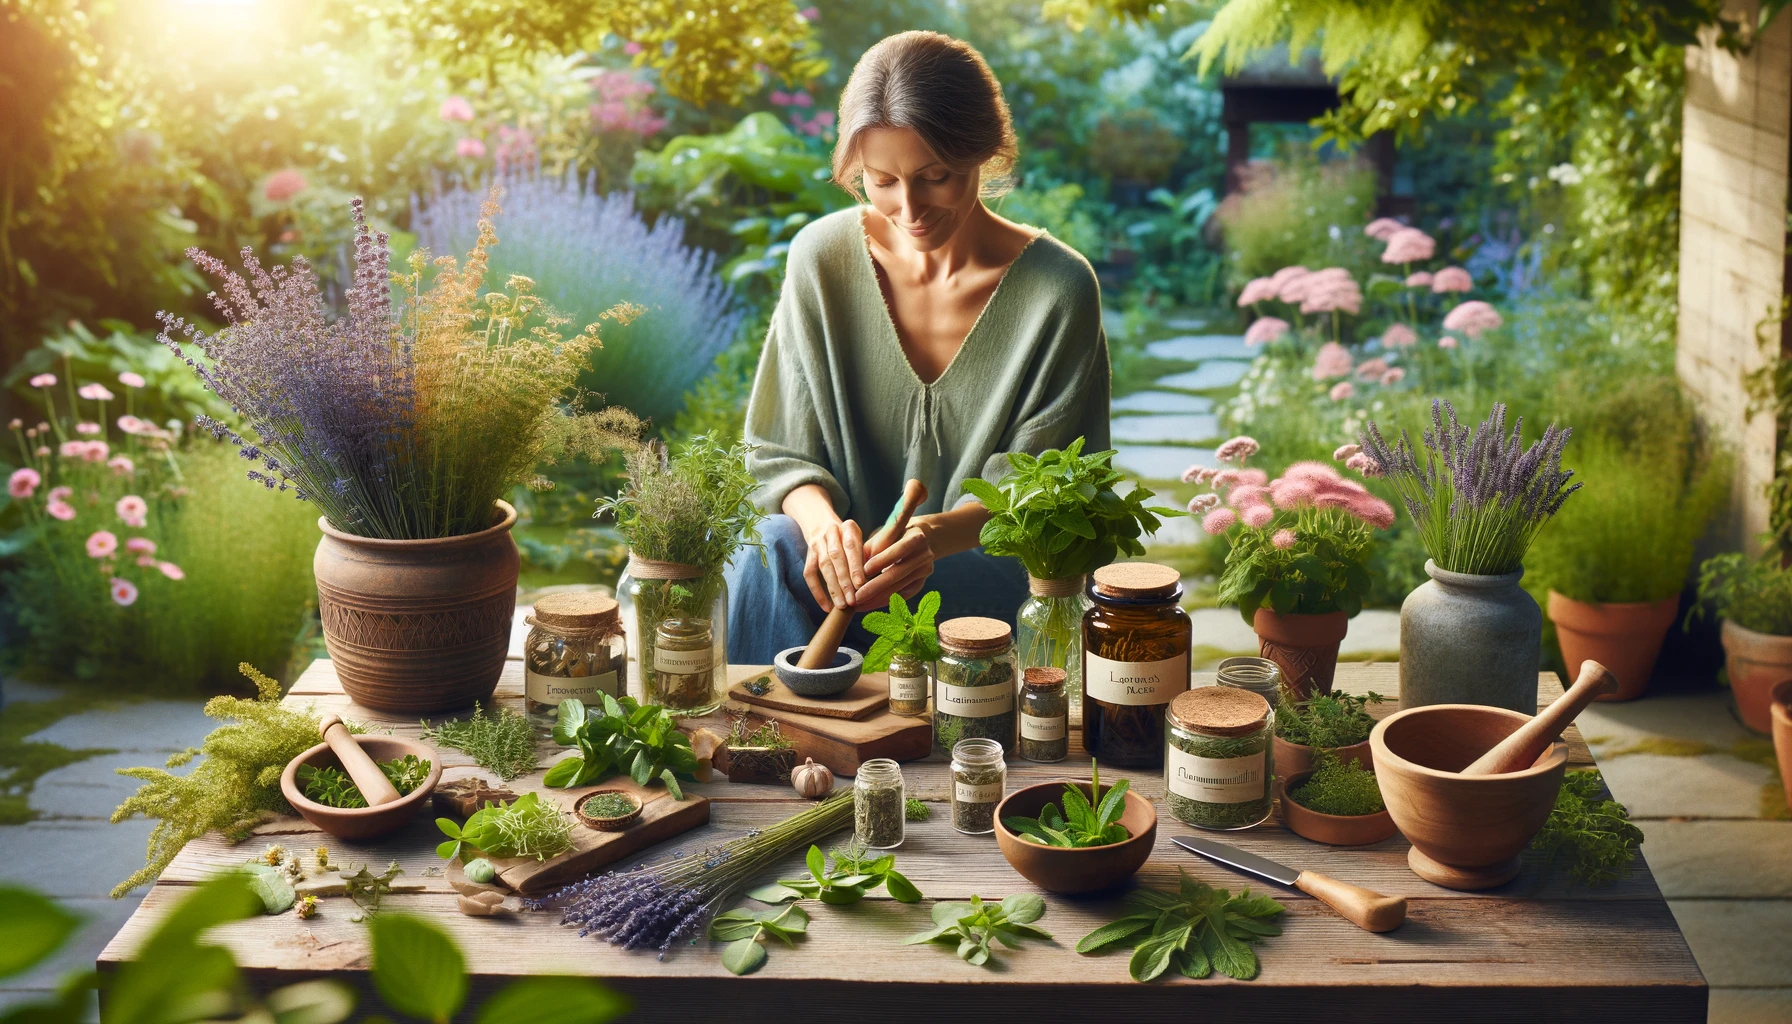 Middle-aged woman preparing herbal remedies in a lush garden, representing Healthy Life - New Start's focus on natural healing.